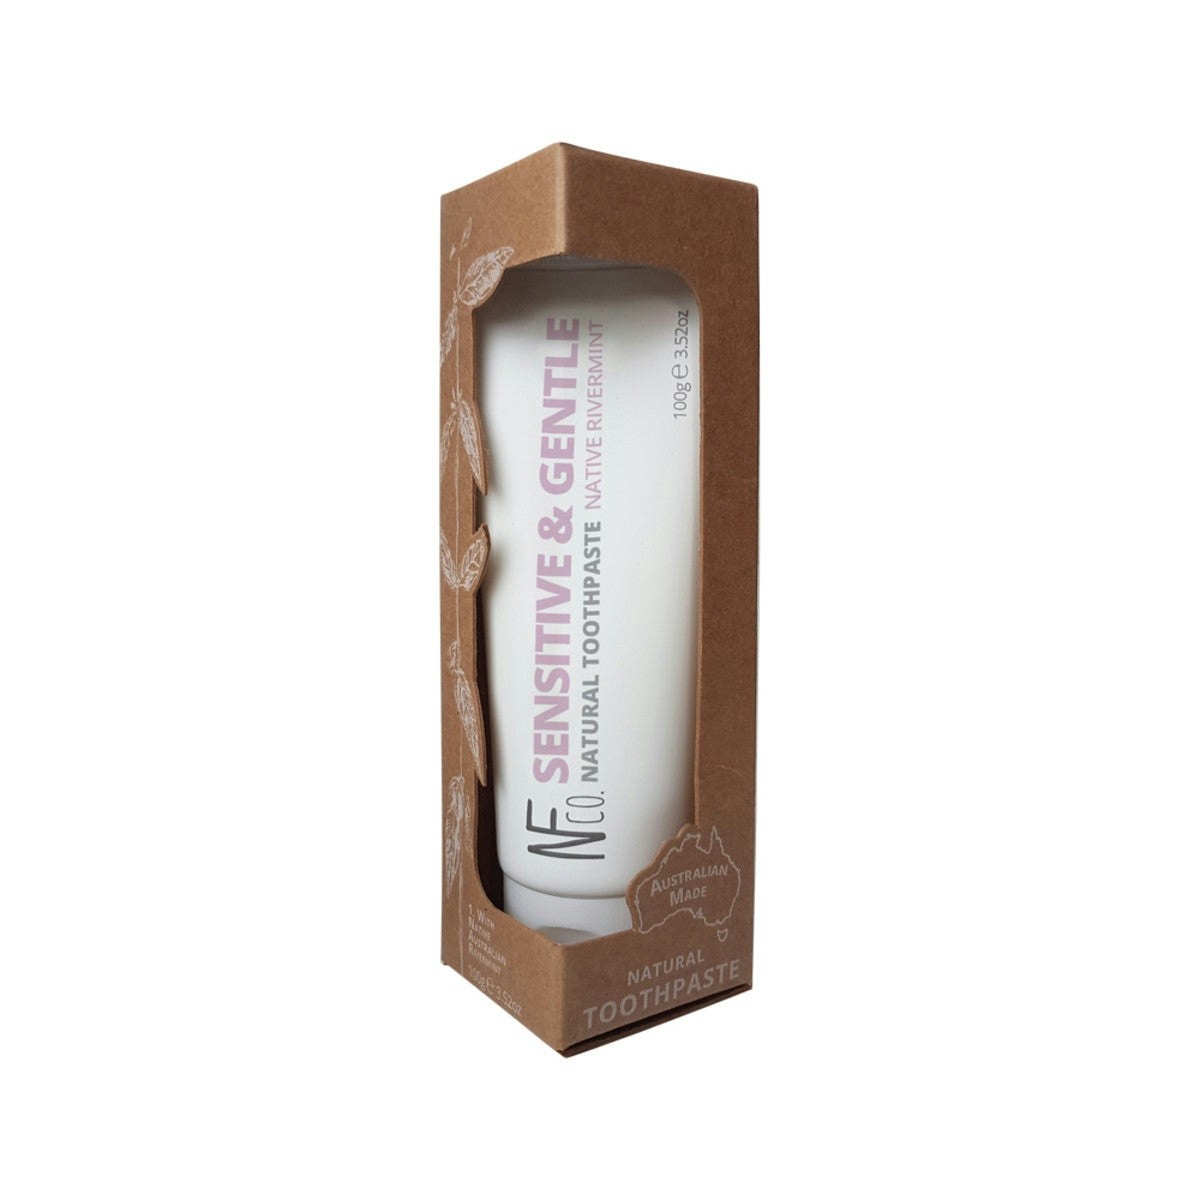 image of The Natural Family Co. Natural Toothpaste Sensitive & Gentle (with Native Rivermint) 100g on white background